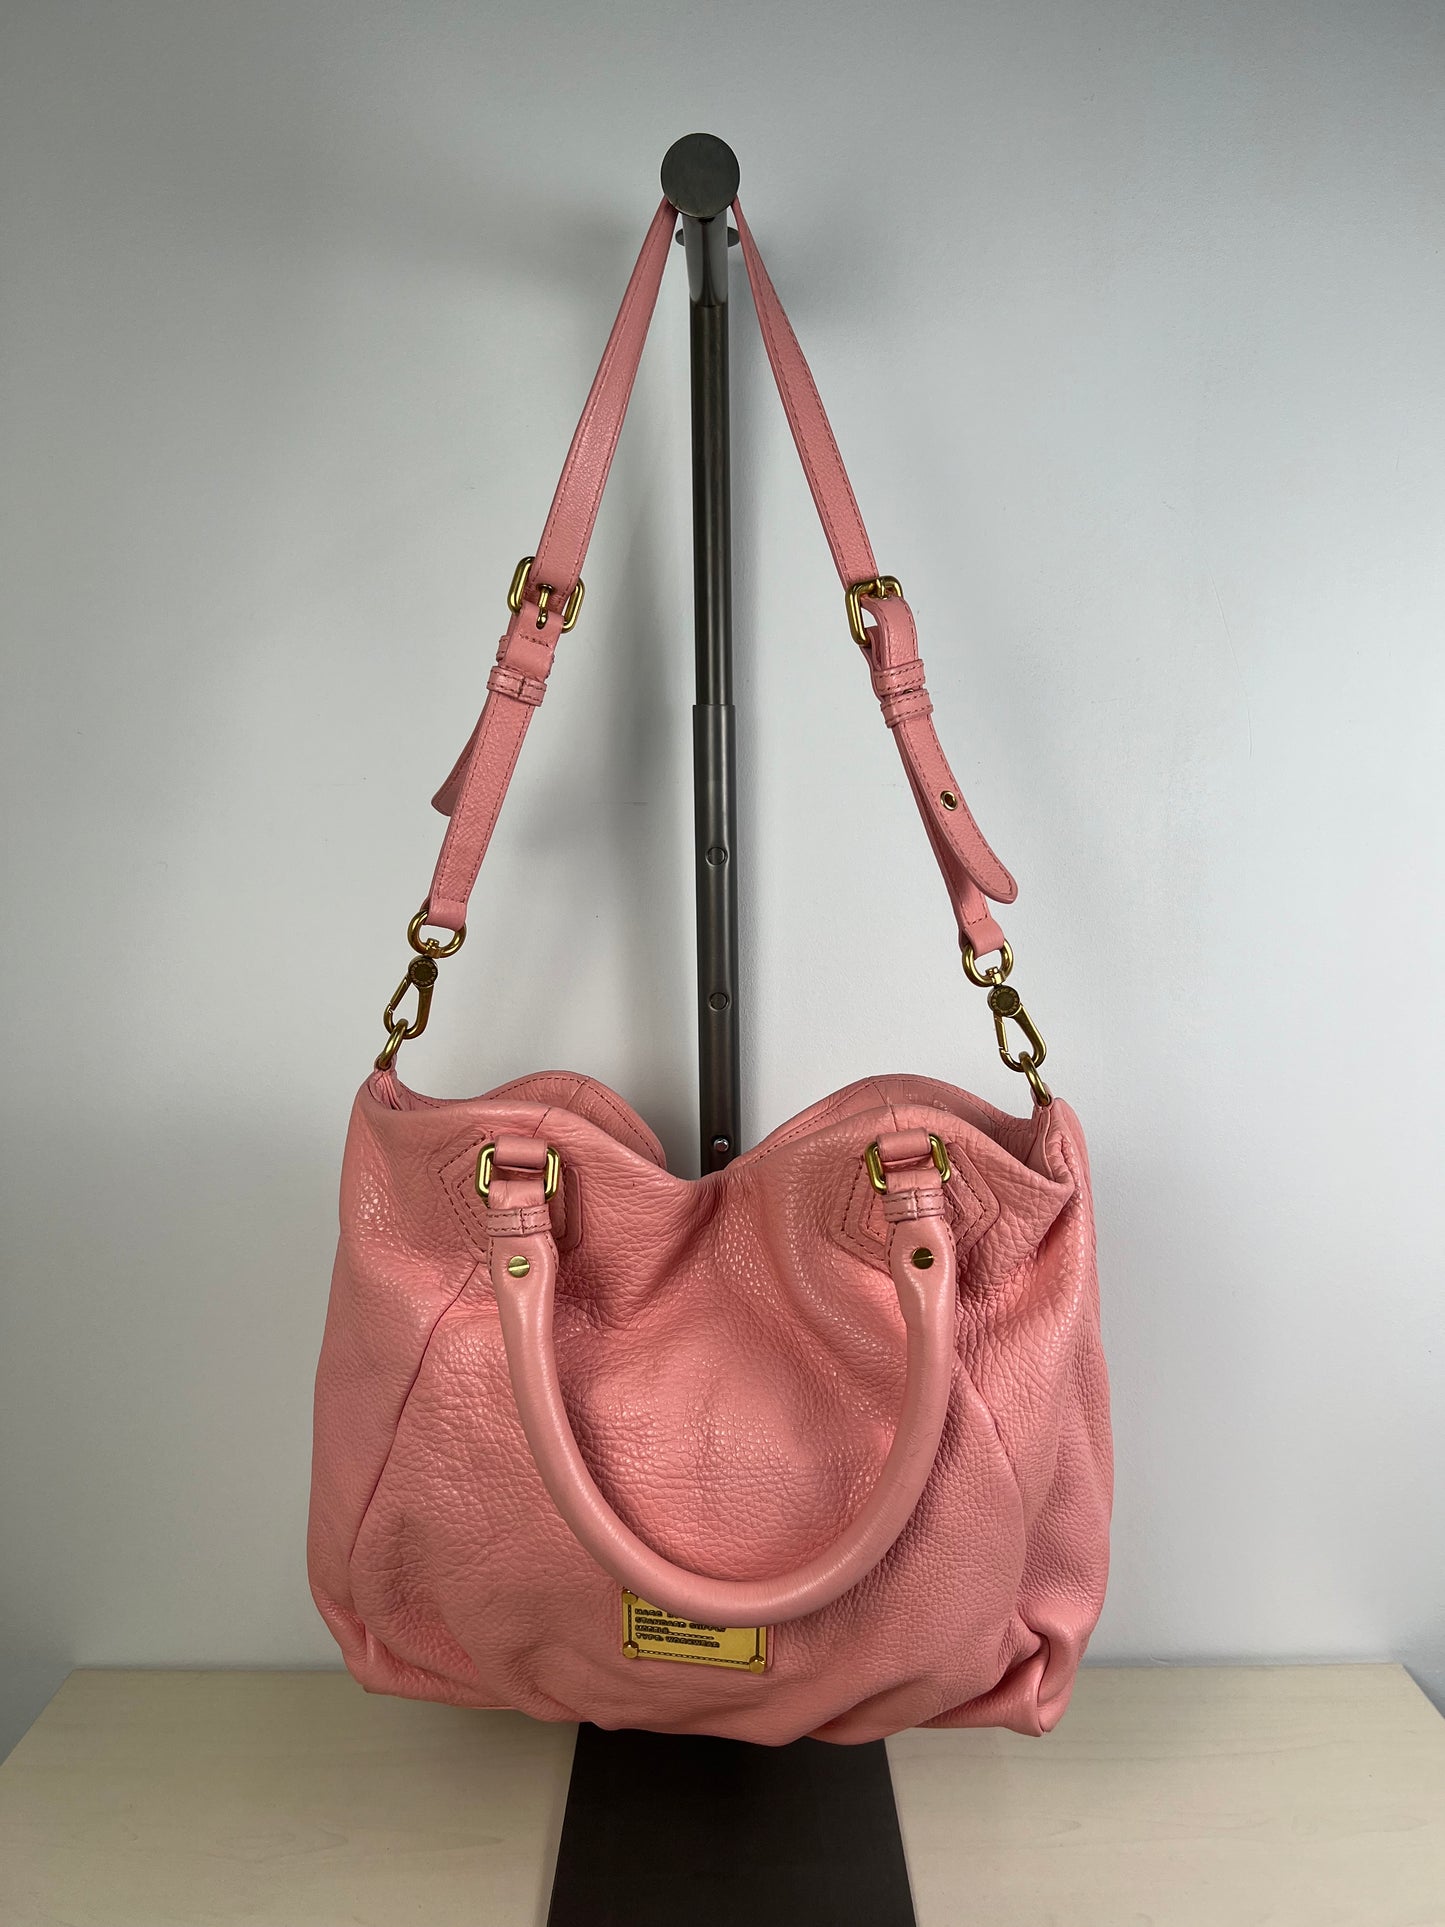 Handbag By Marc By Marc Jacobs  Size: Large